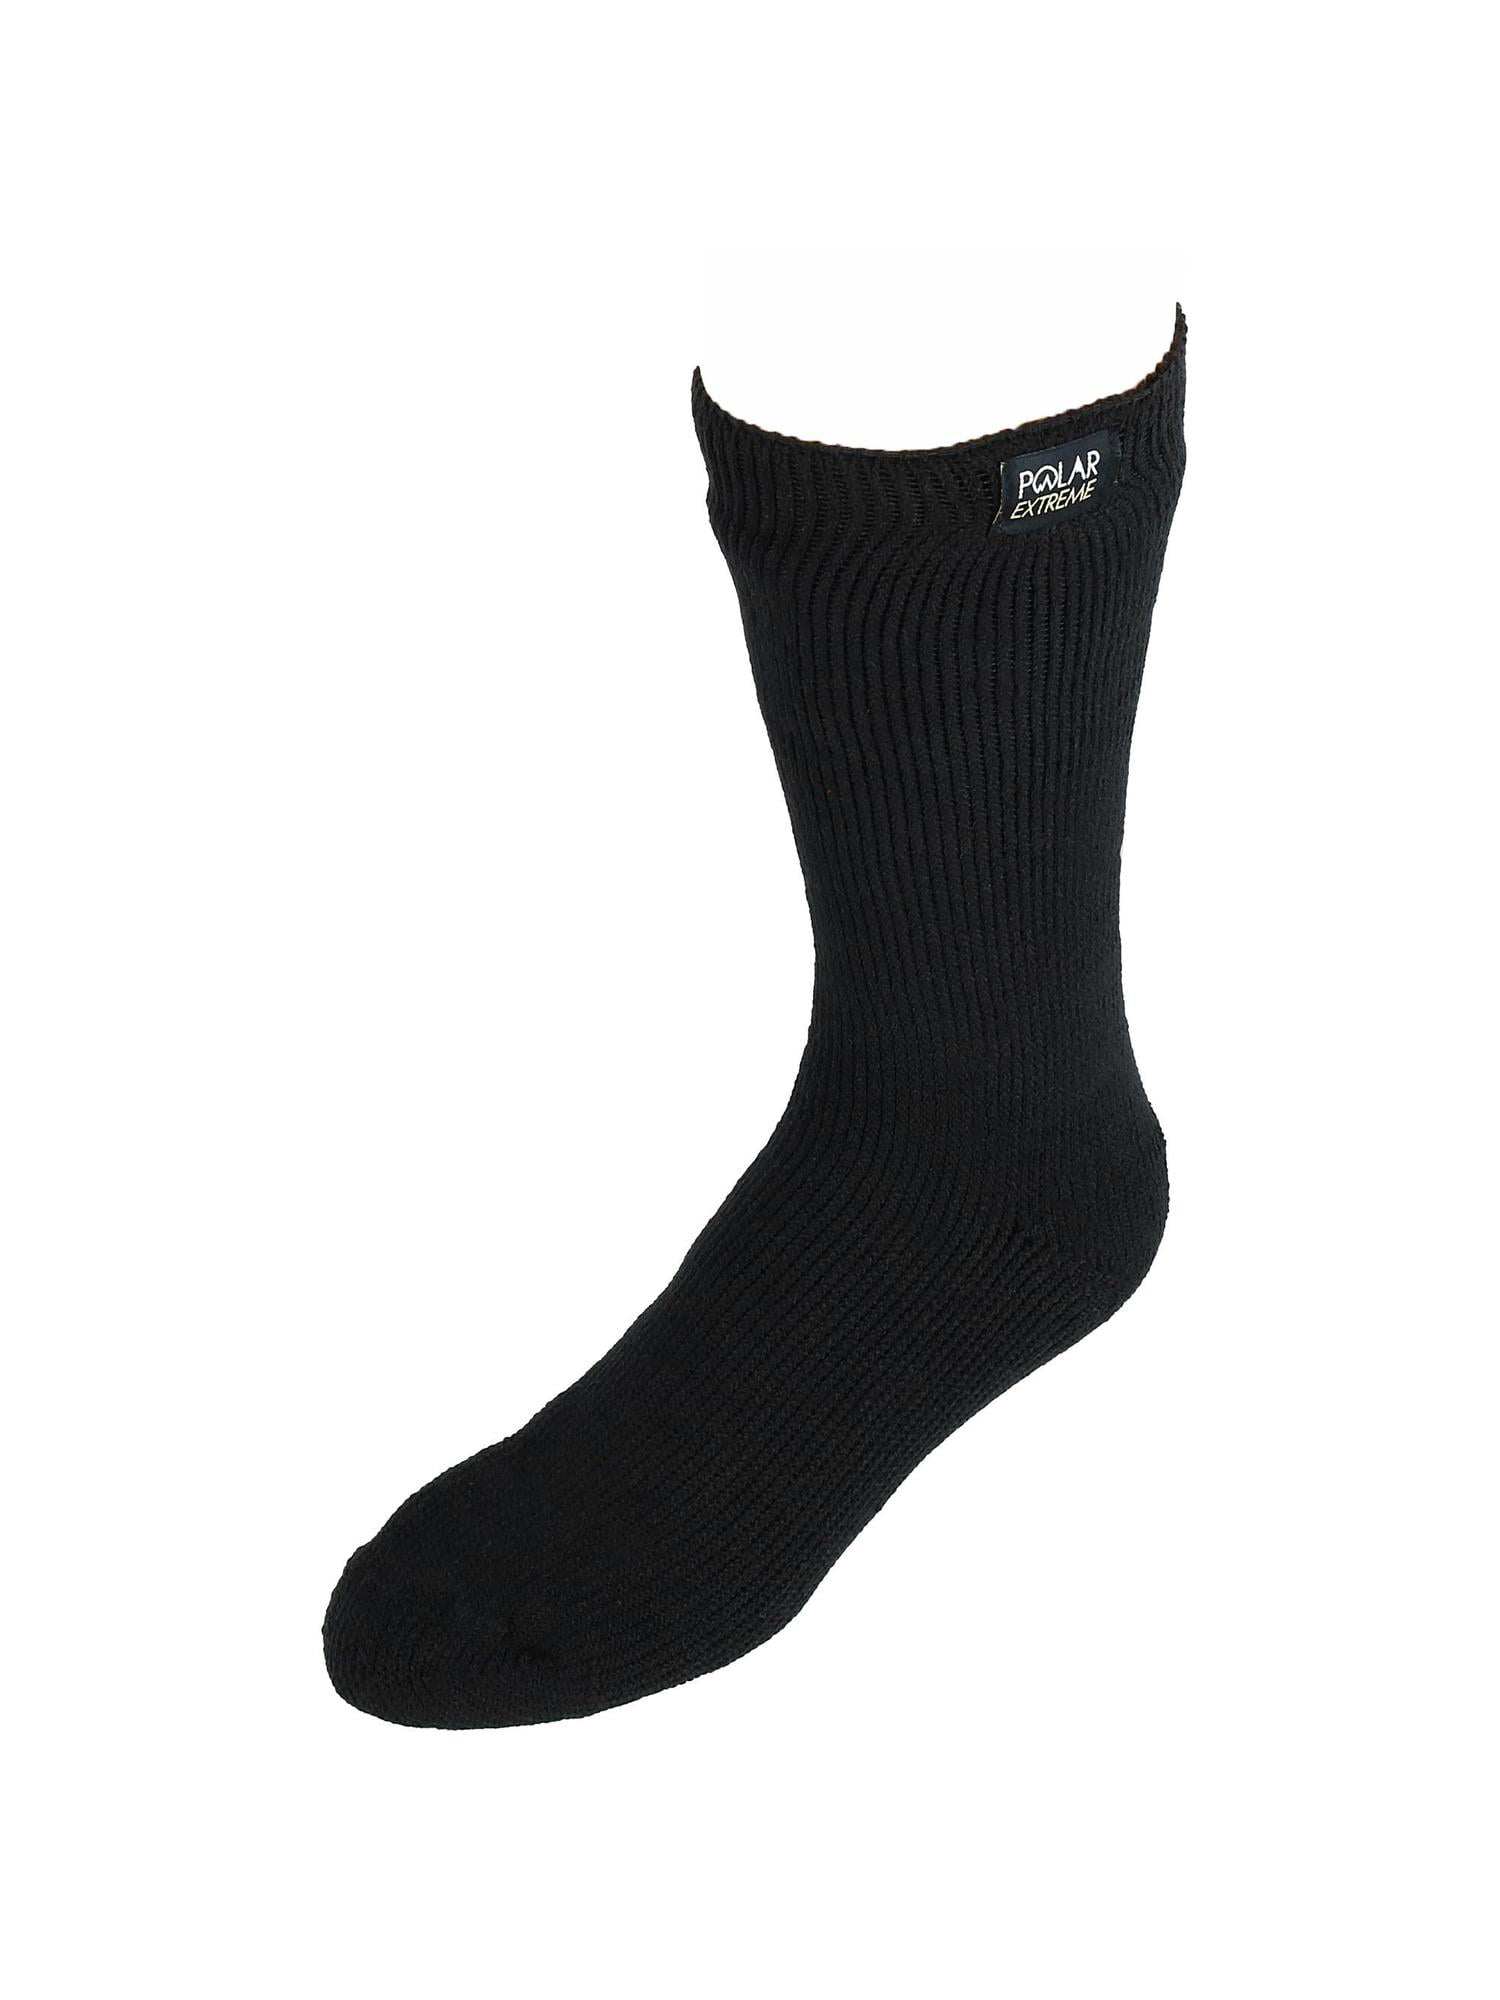 Boys Socks 5 Pack X 2 Ex Store 10 Pairs Cotton Rich multipacks 7-10 years . 